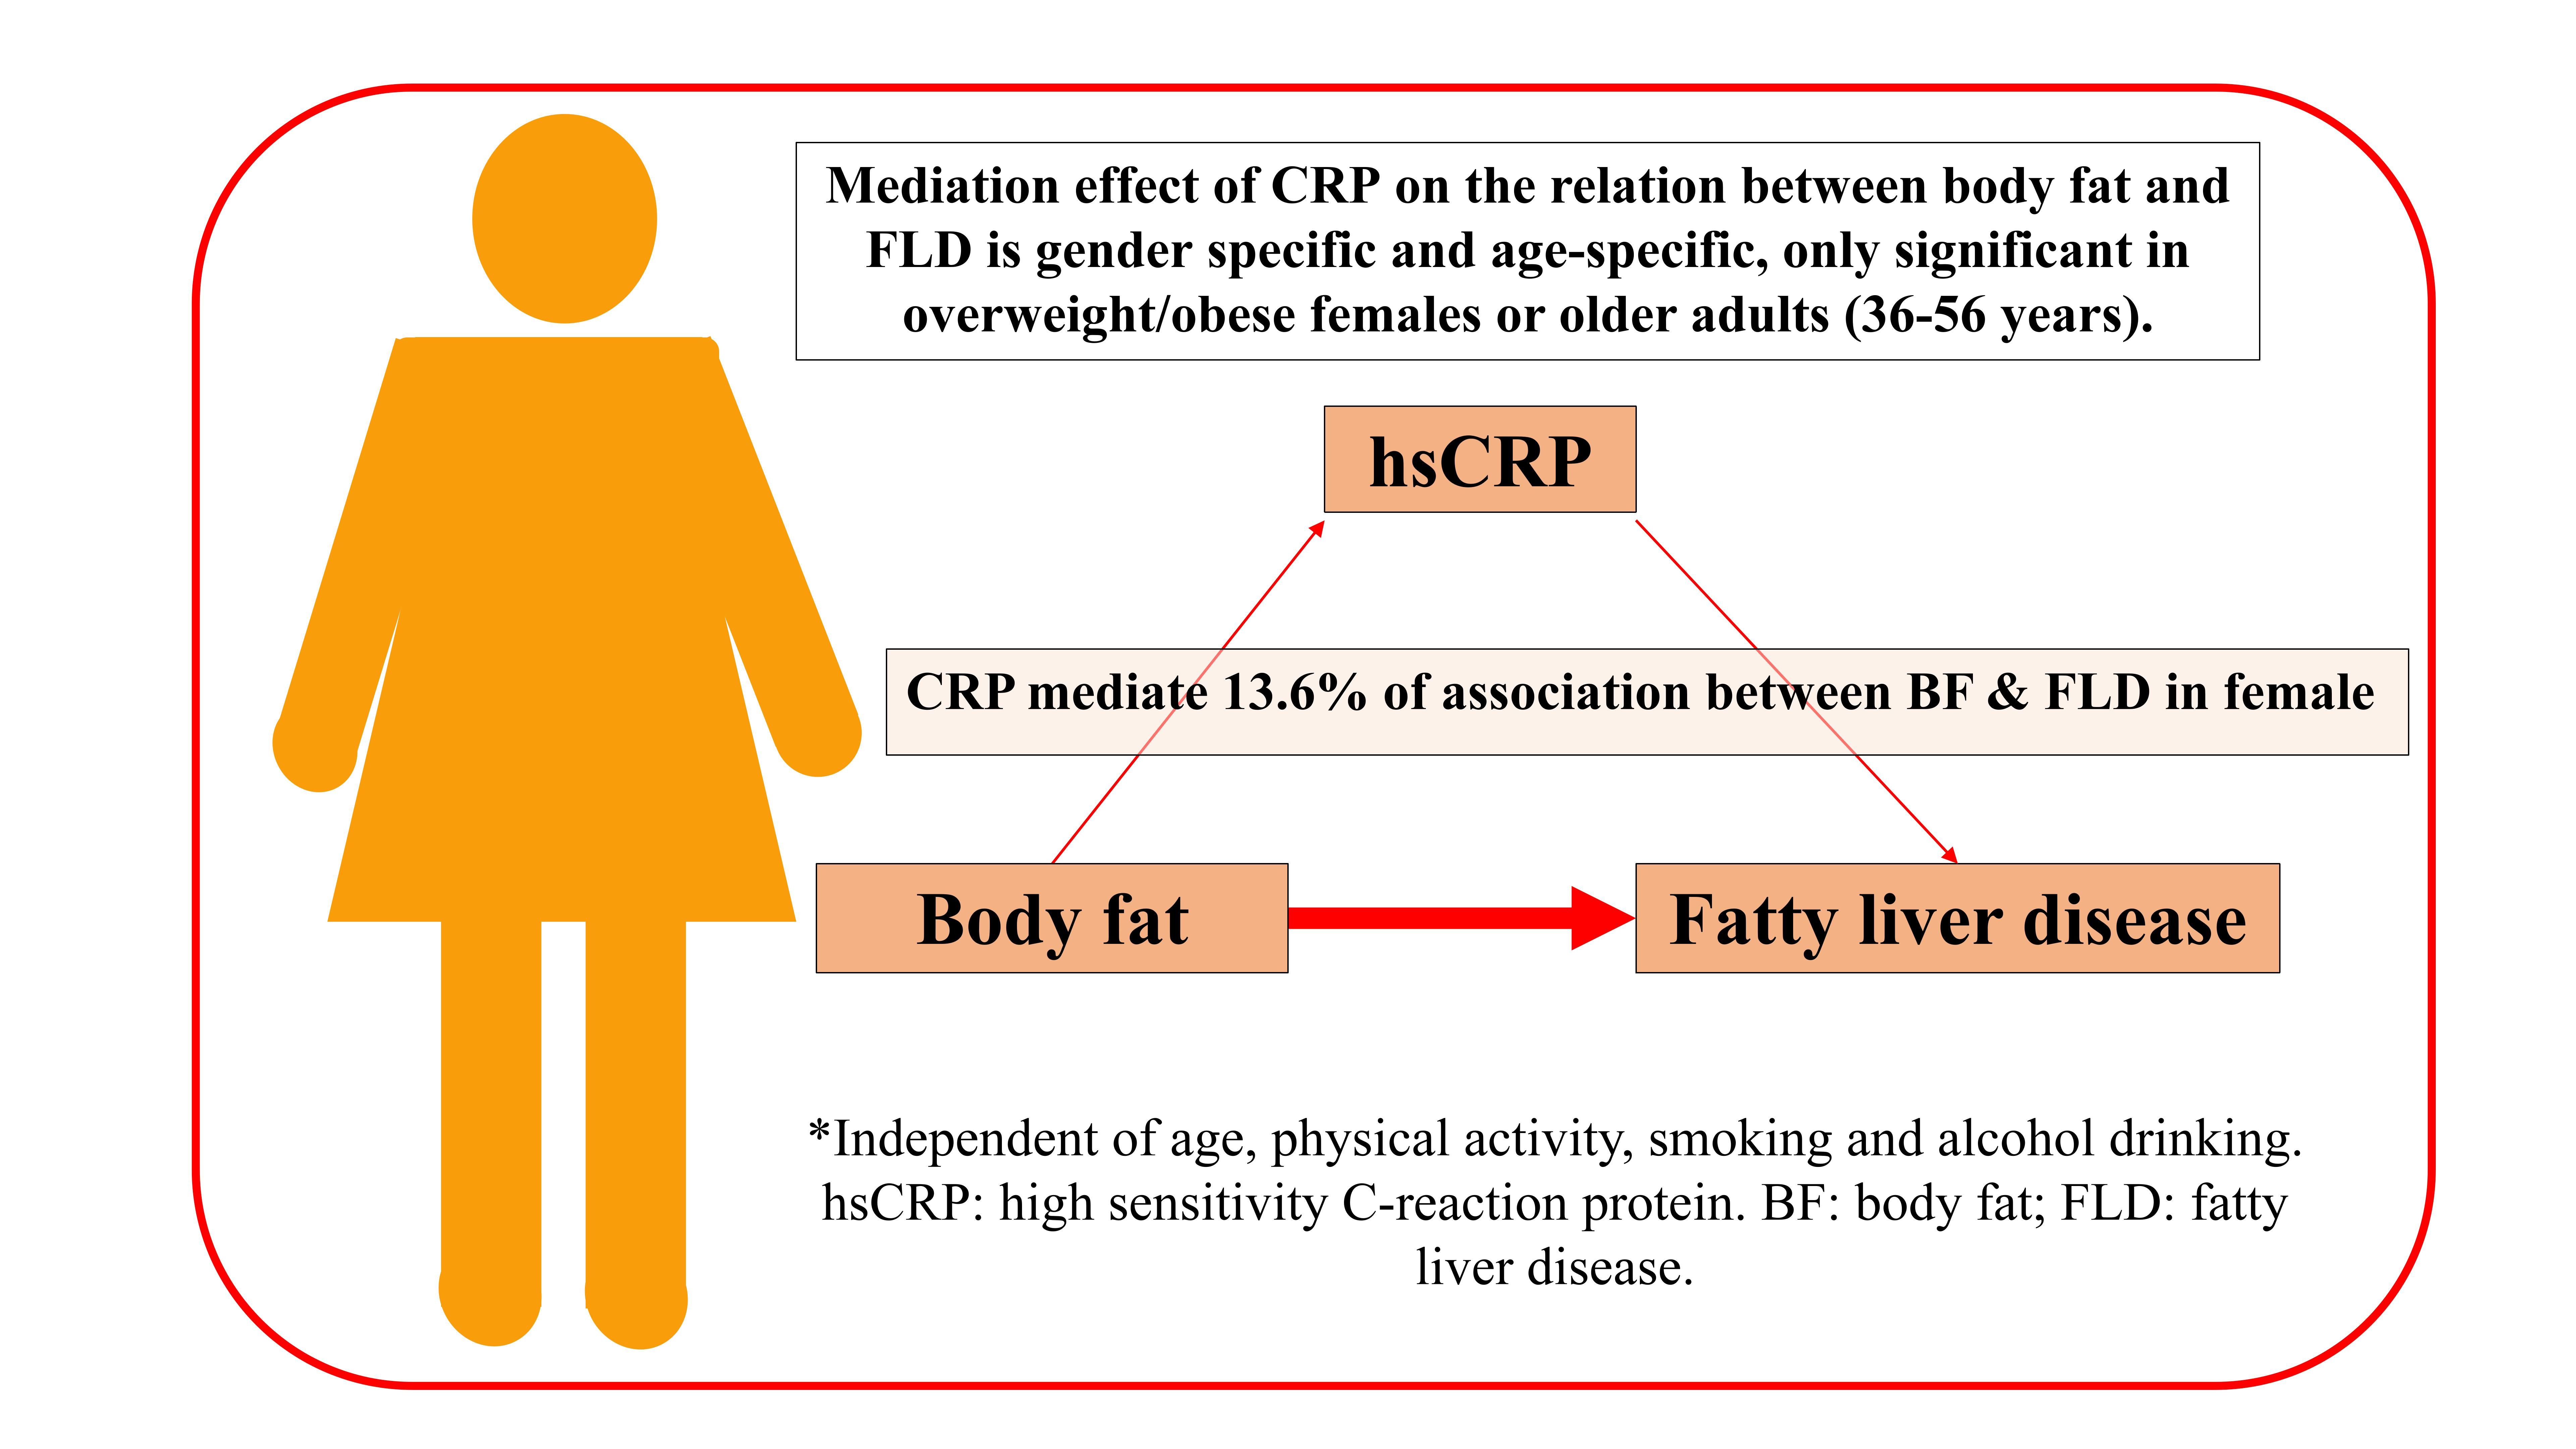 Biology Free Full Text Mediating Roles Of Hscrp Tnf A And Adiponectin On The Associations Between Body Fat And Fatty Liver Disease Among Overweight And Obese Adults Html